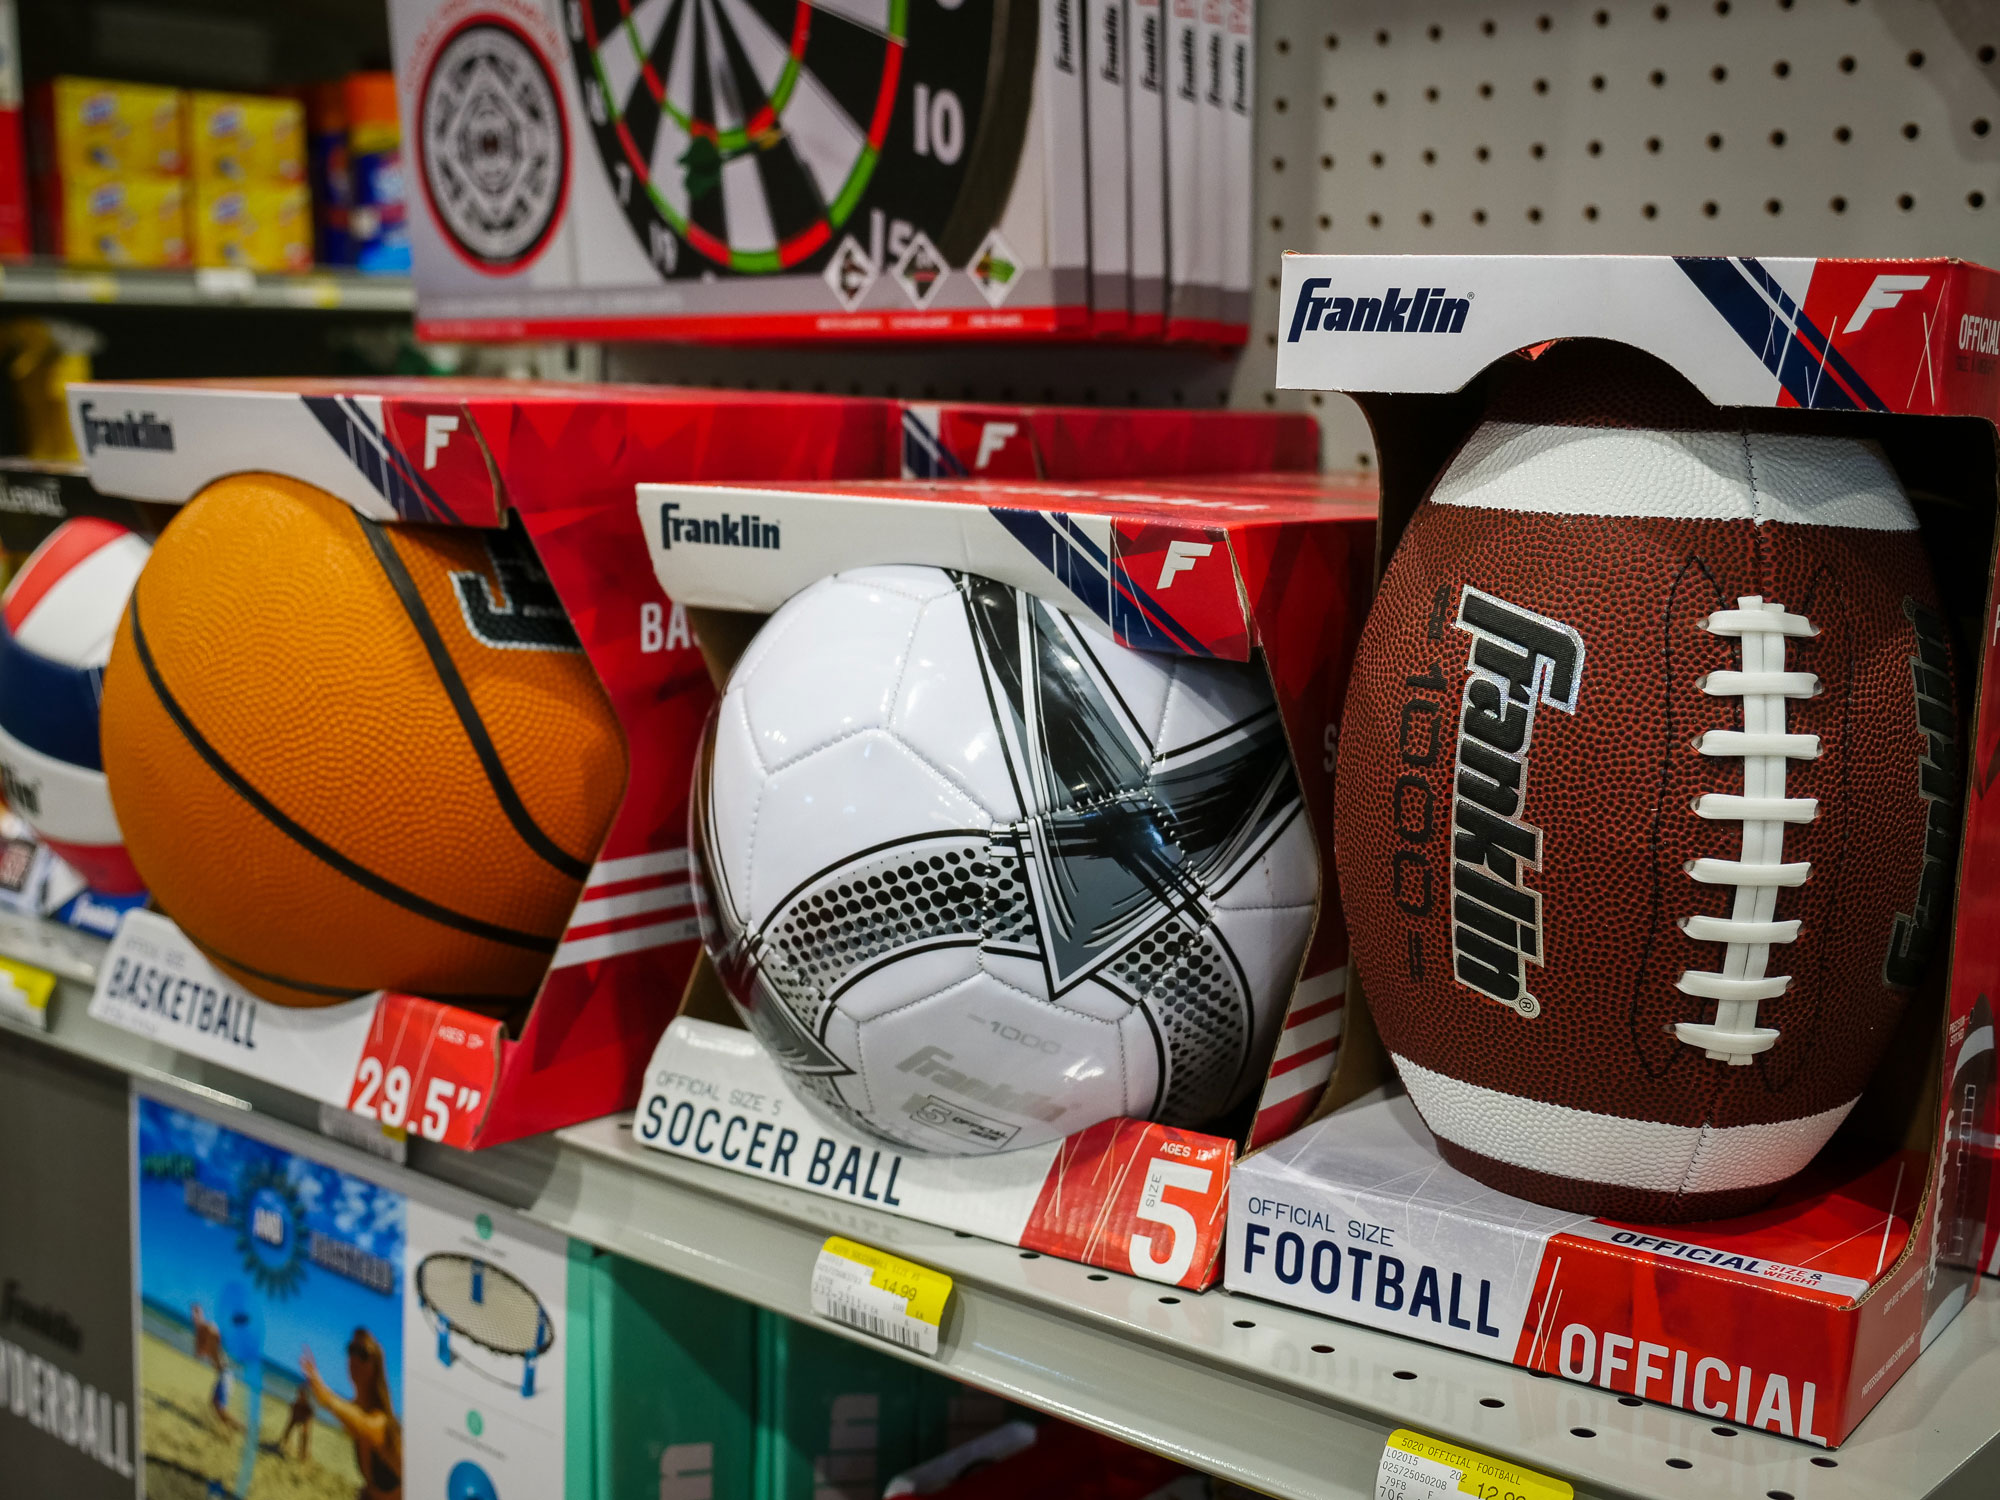 basketball, soccer ball, football at lowry's store in harmony, nc